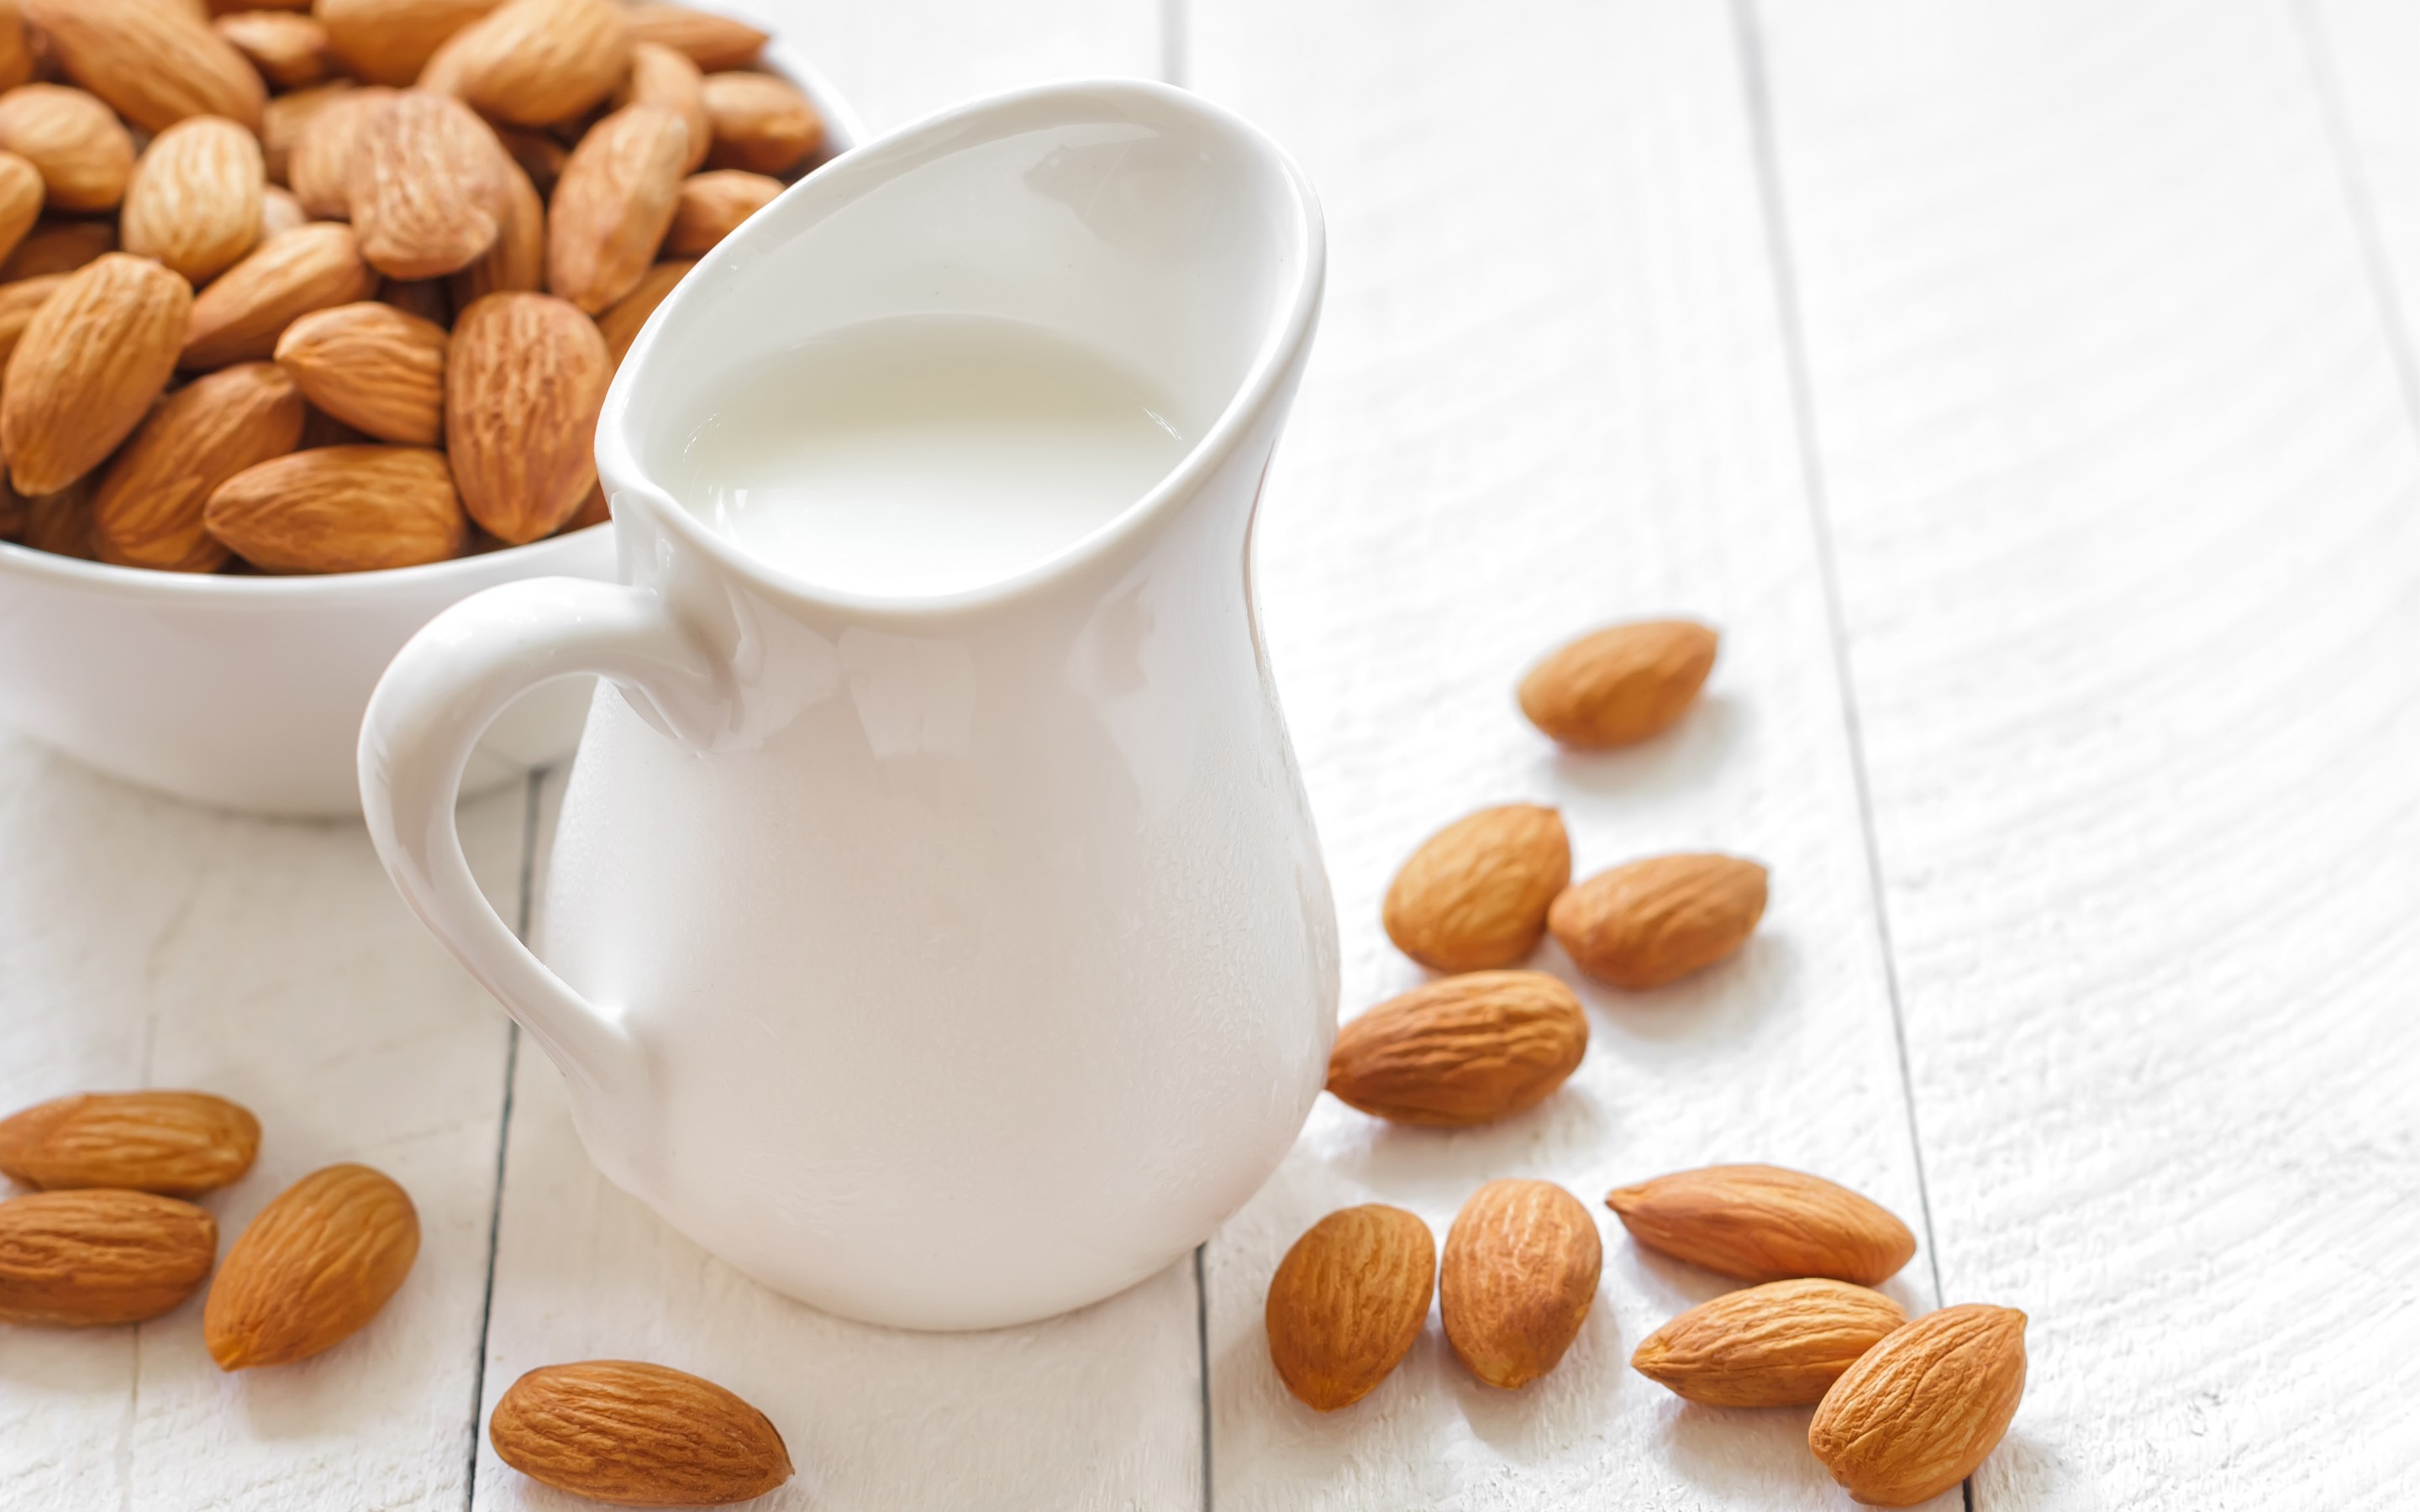 Food Almond HD Wallpaper | Background Image